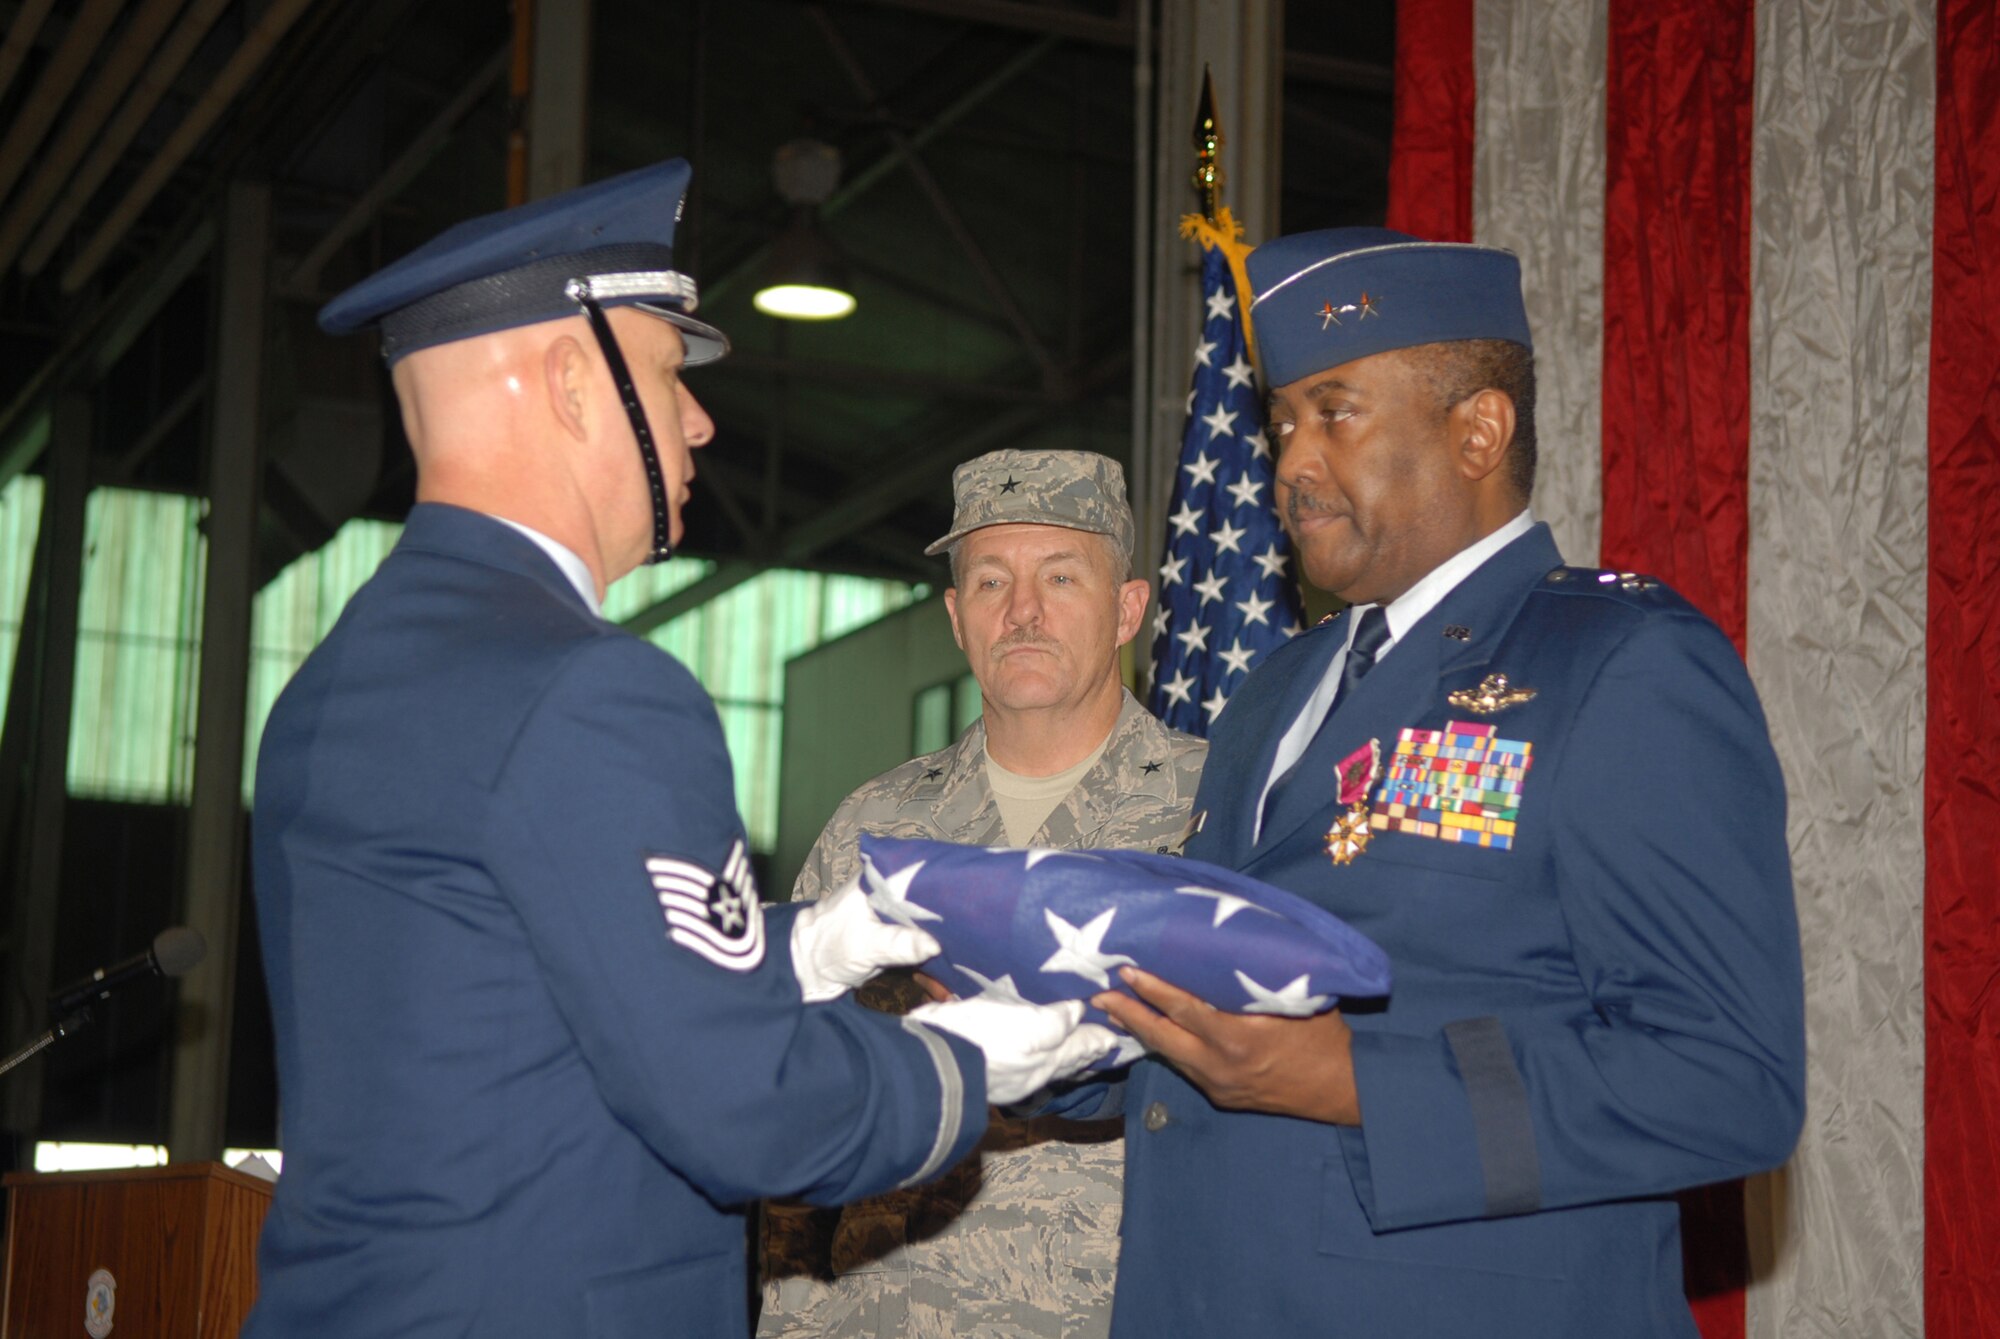 Brig. Gen. Hugh Broomall (middle, rear) Deputy Adjutant General for Air, Delaware National Guard, watches as 166th Airlift Wing Honor Guard member Tech. Sgt. Bill Austin presents Brig. Gen. Ernest Talbert, vice-commander, Delaware Air National Guard, his personal American flag during Gen. Talbert's retirement ceremony in New Castle, Del. on Jan. 11, 2009. Gen. Talbert had just received the honorary rank of major general in the Delaware National Guard. Gen. Talbert, a rated command pilot with more than 6,500 flight hours, flew C-130 aircraft missions in Operation Desert Storm and was the 166th Airlift Wing commander in Operation Iraqi Freedom. During his 36-year career he became the first African-American colonel in the Delaware ANG and the first and only African-American general in the over 350-year history of the Delaware National Guard. (U.S. Air Force photo/Staff Sgt. Melissa Chatham)